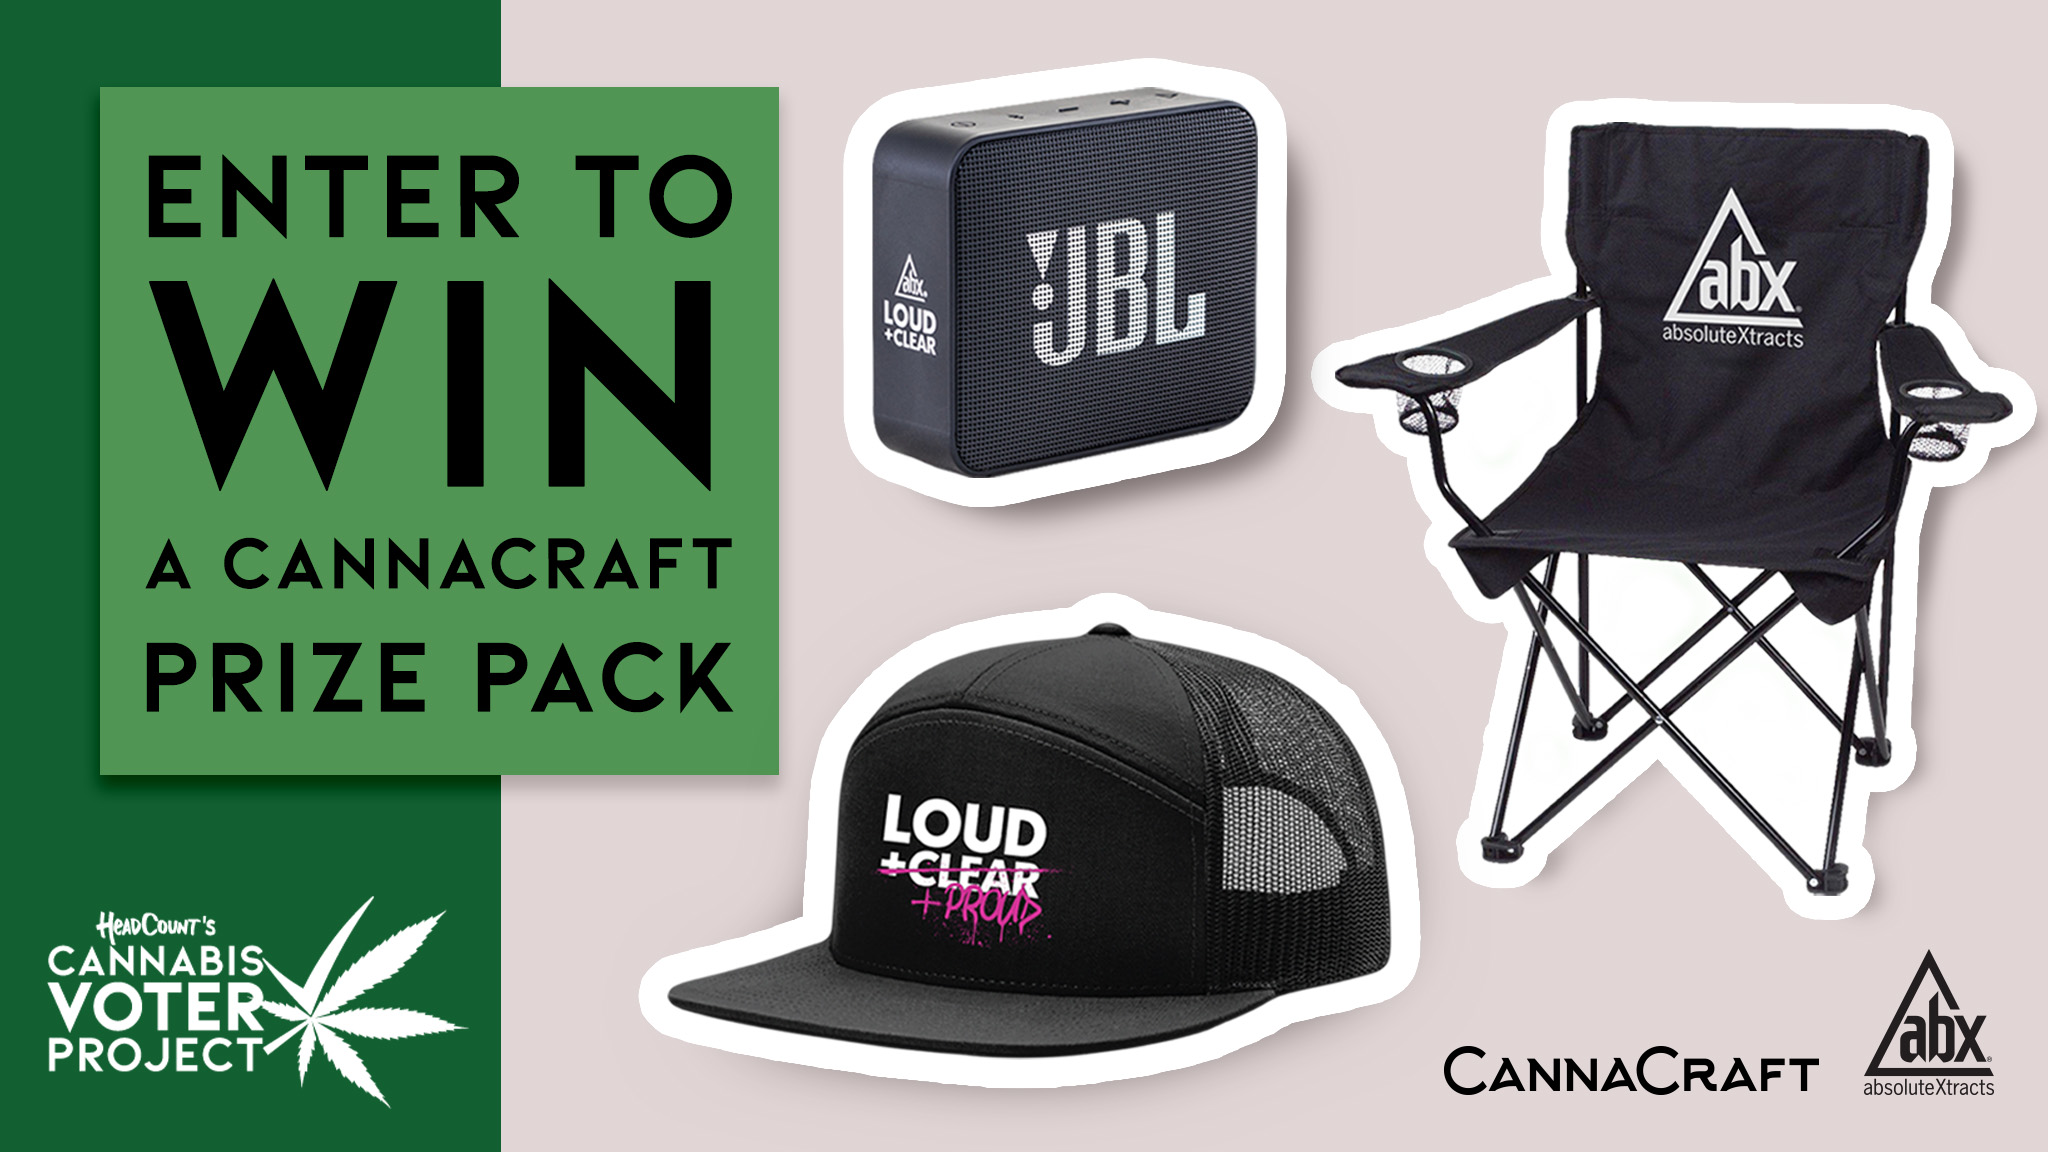 Enter to Win a CannaCraft Prize Pack | Cannabis Voter Project